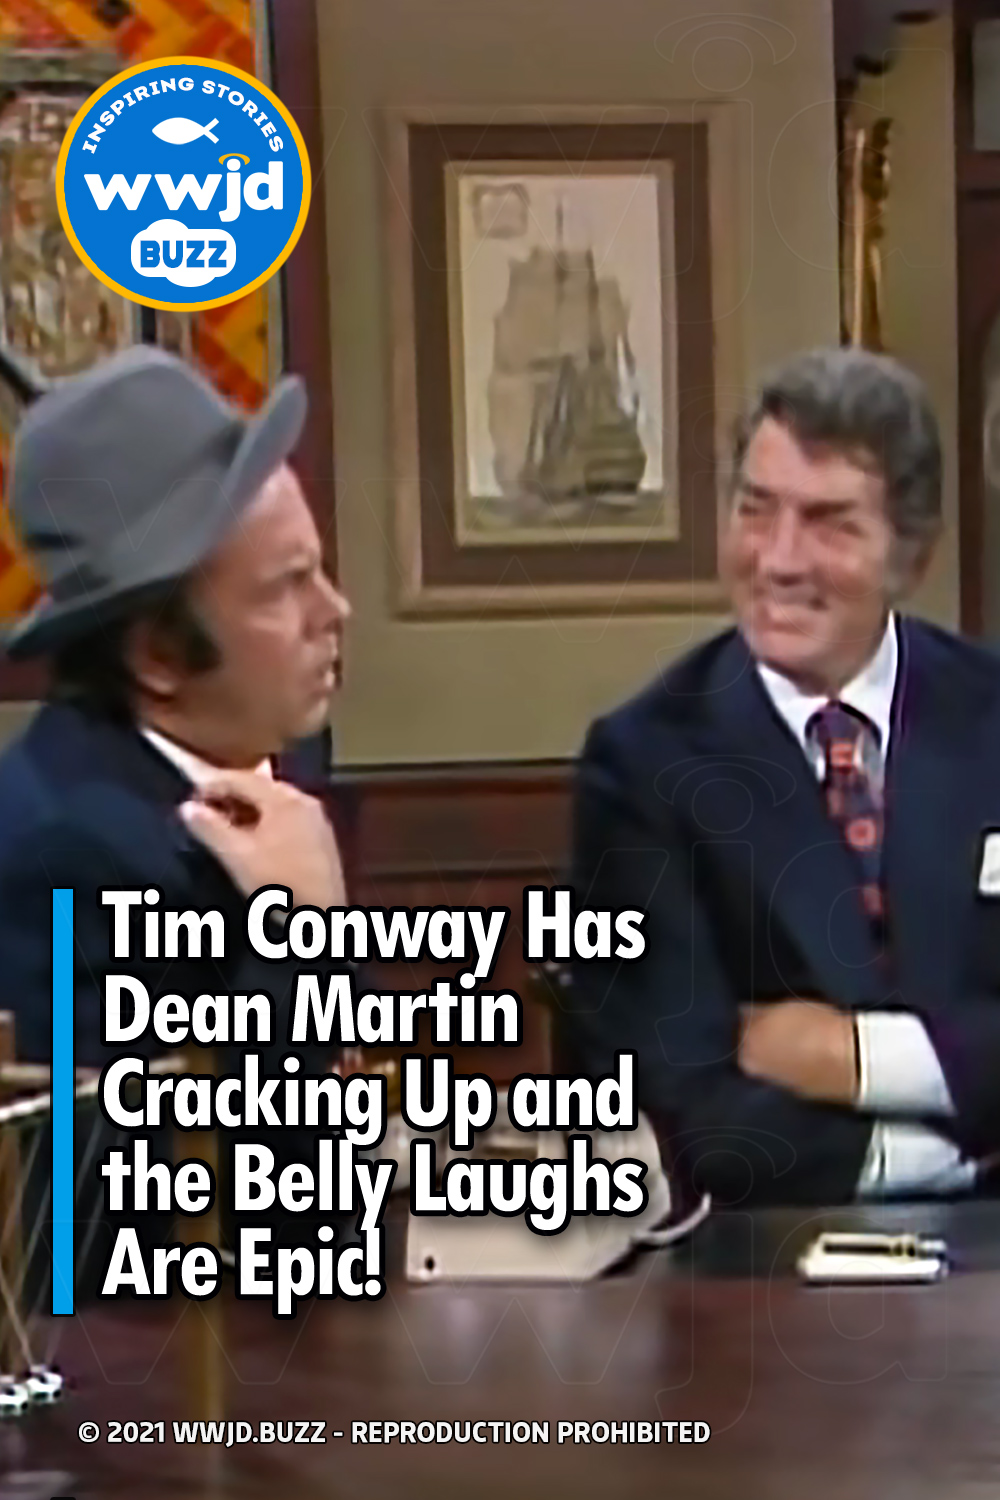 Tim Conway Has Dean Martin Cracking Up and the Belly Laughs Are Epic!